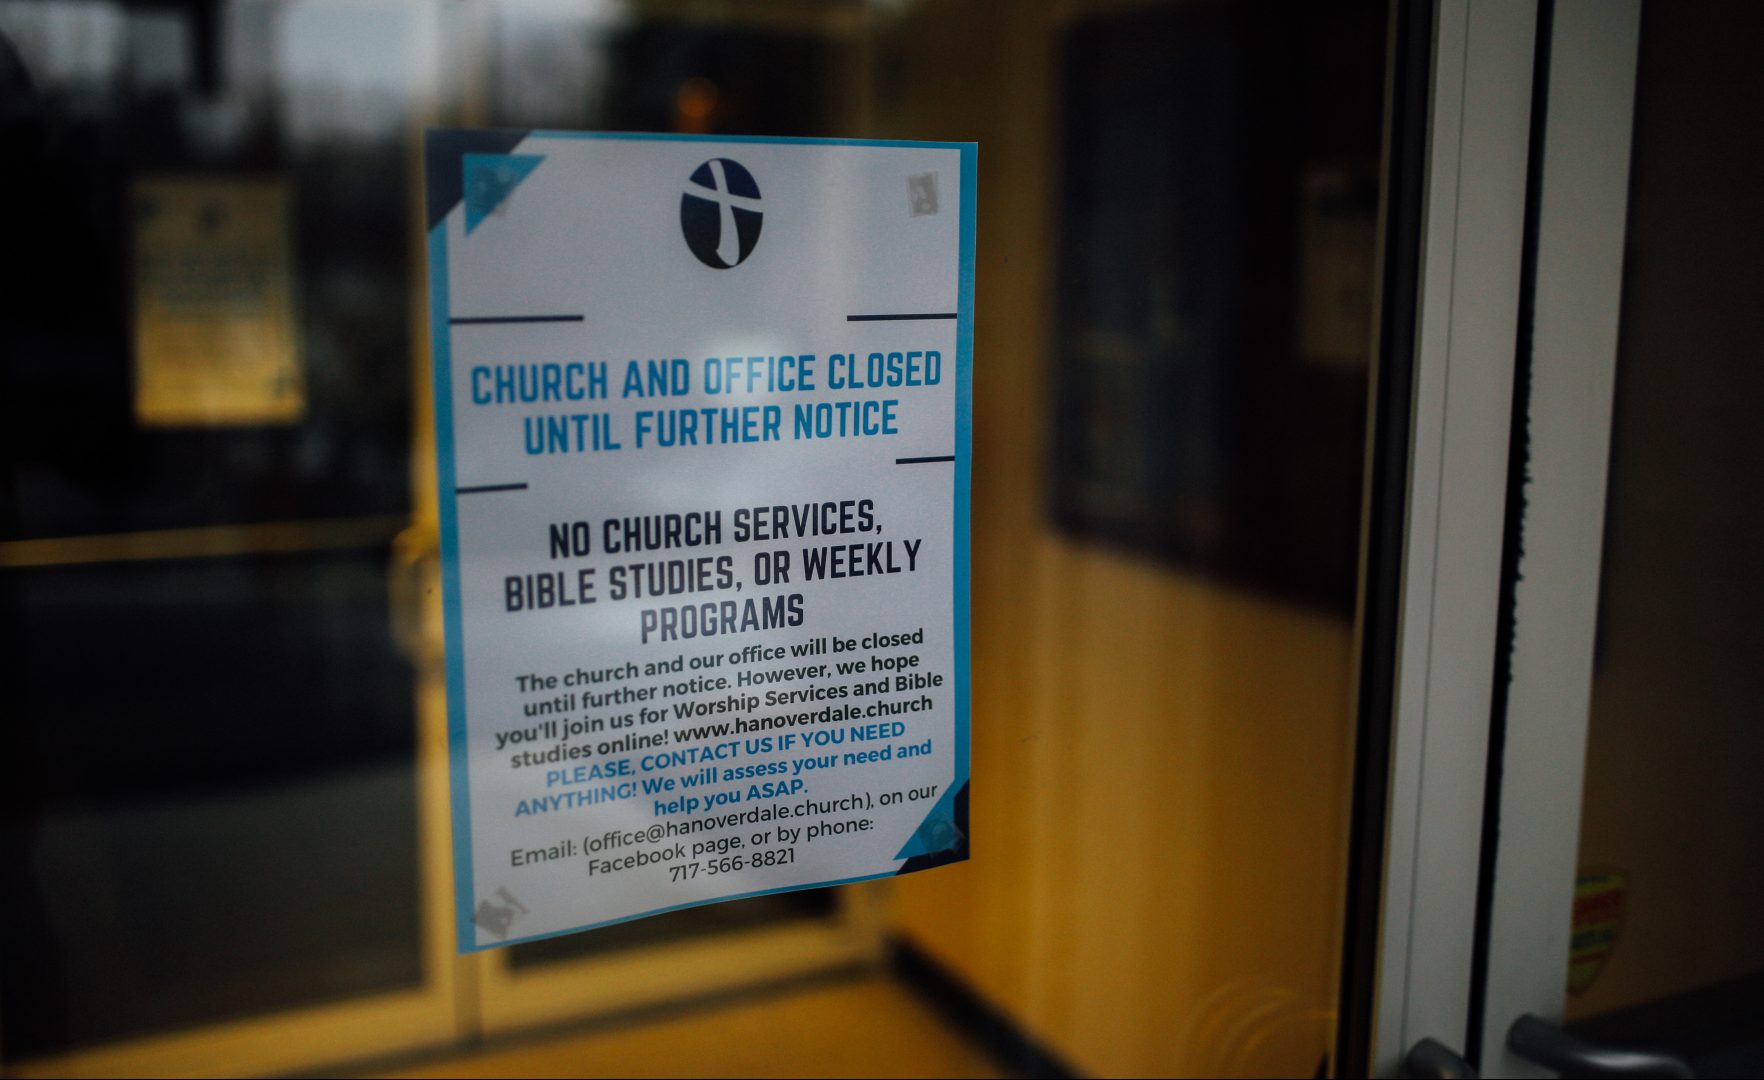 A sign at the Hanoverdale Church of The Brethren in Hummelstown, Pa., is seen on April 1, 2020. The church and office are closed until further notice during the coronavirus pandemic and statewide stay-at-home order.